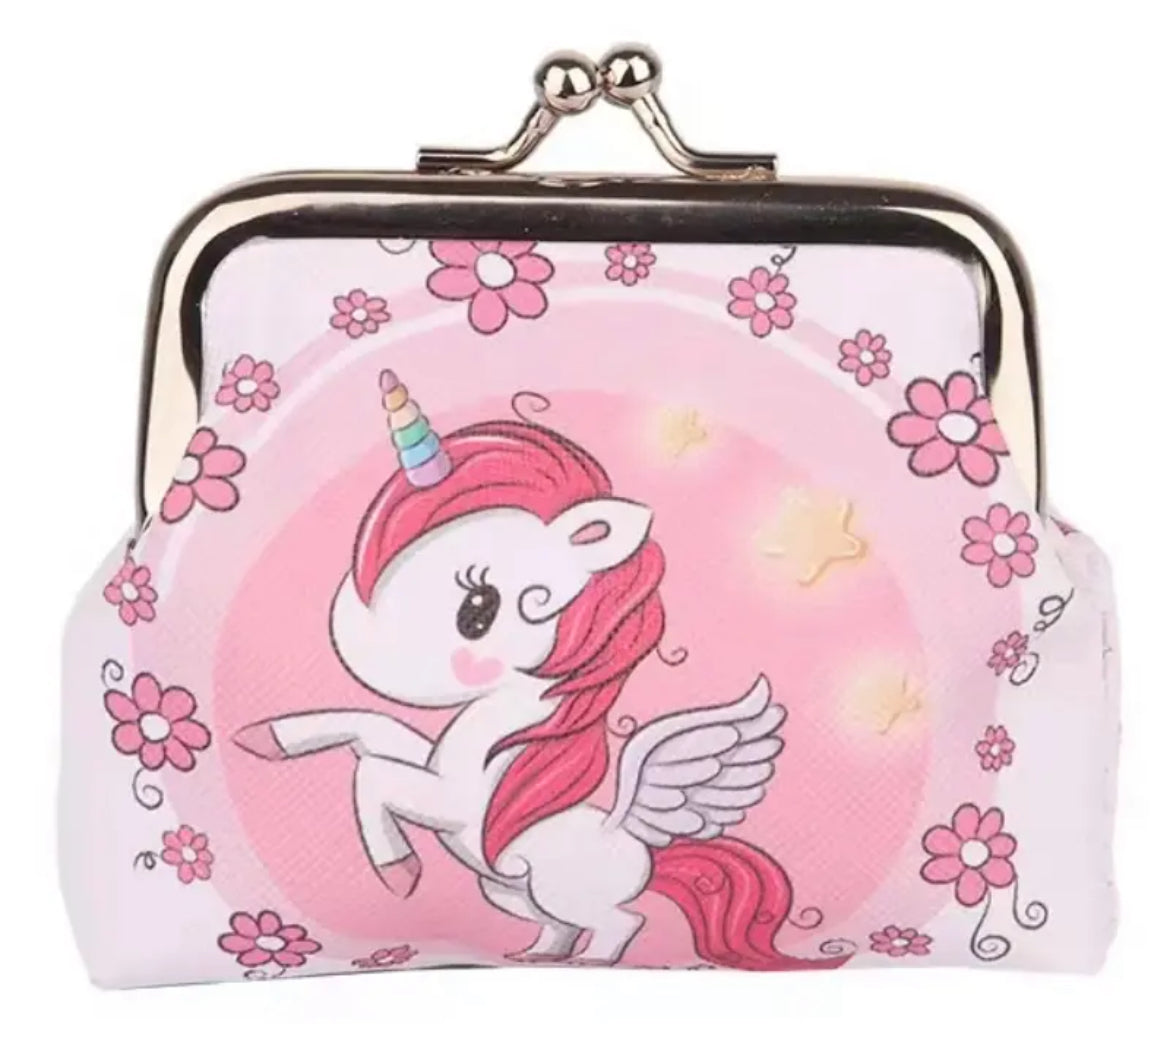 My Little Pony Unicorn Coin Purse, Bringing Back The 80’s 🌈🦄 Collection